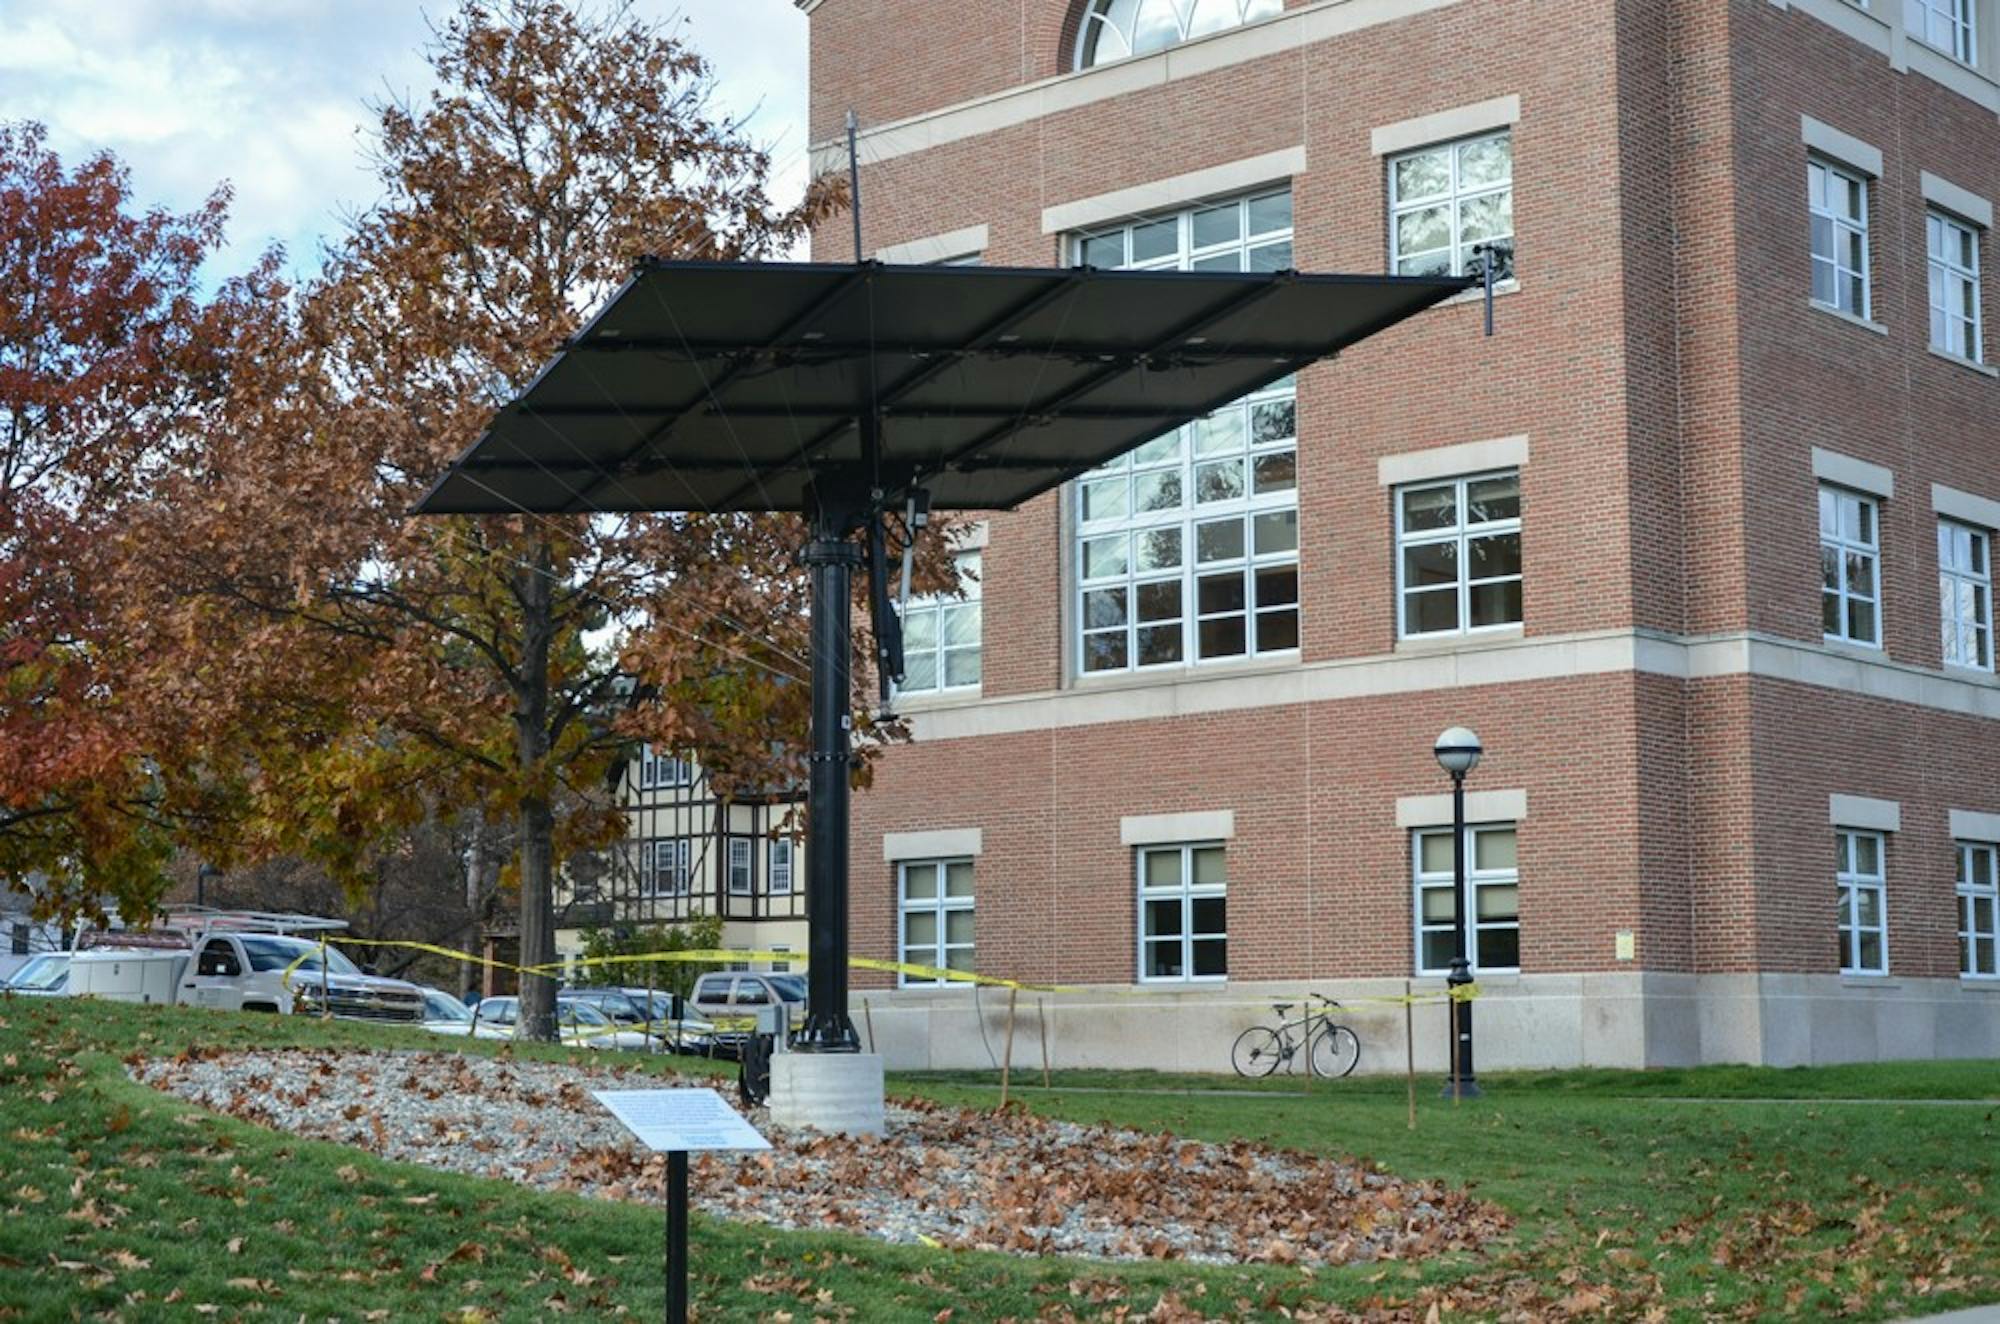 The new solar panel tracks the sun throughout the day and serves as Dartmouth's second photovoltaic system.&nbsp;